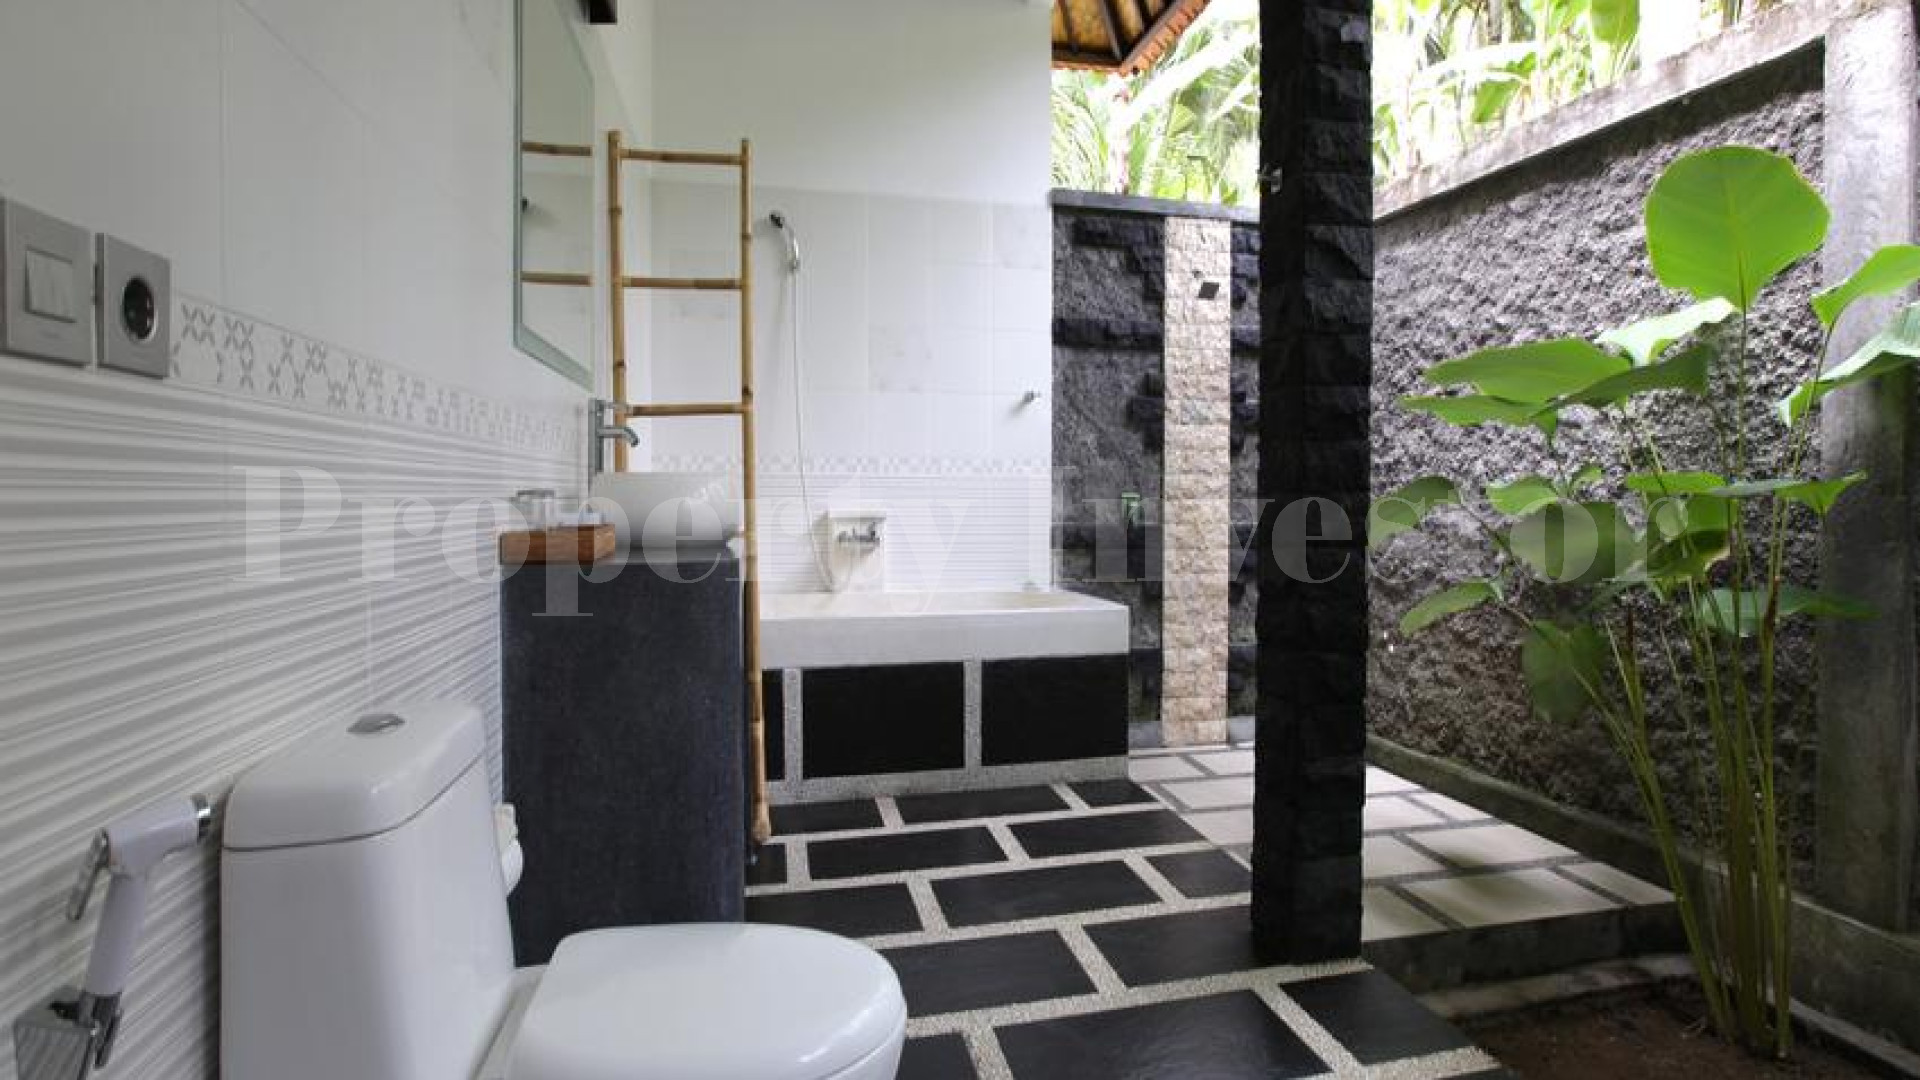 Fully Operational 9 Bungalow Beachfront Boutique Hotel for Sale in Candidasa, Bali